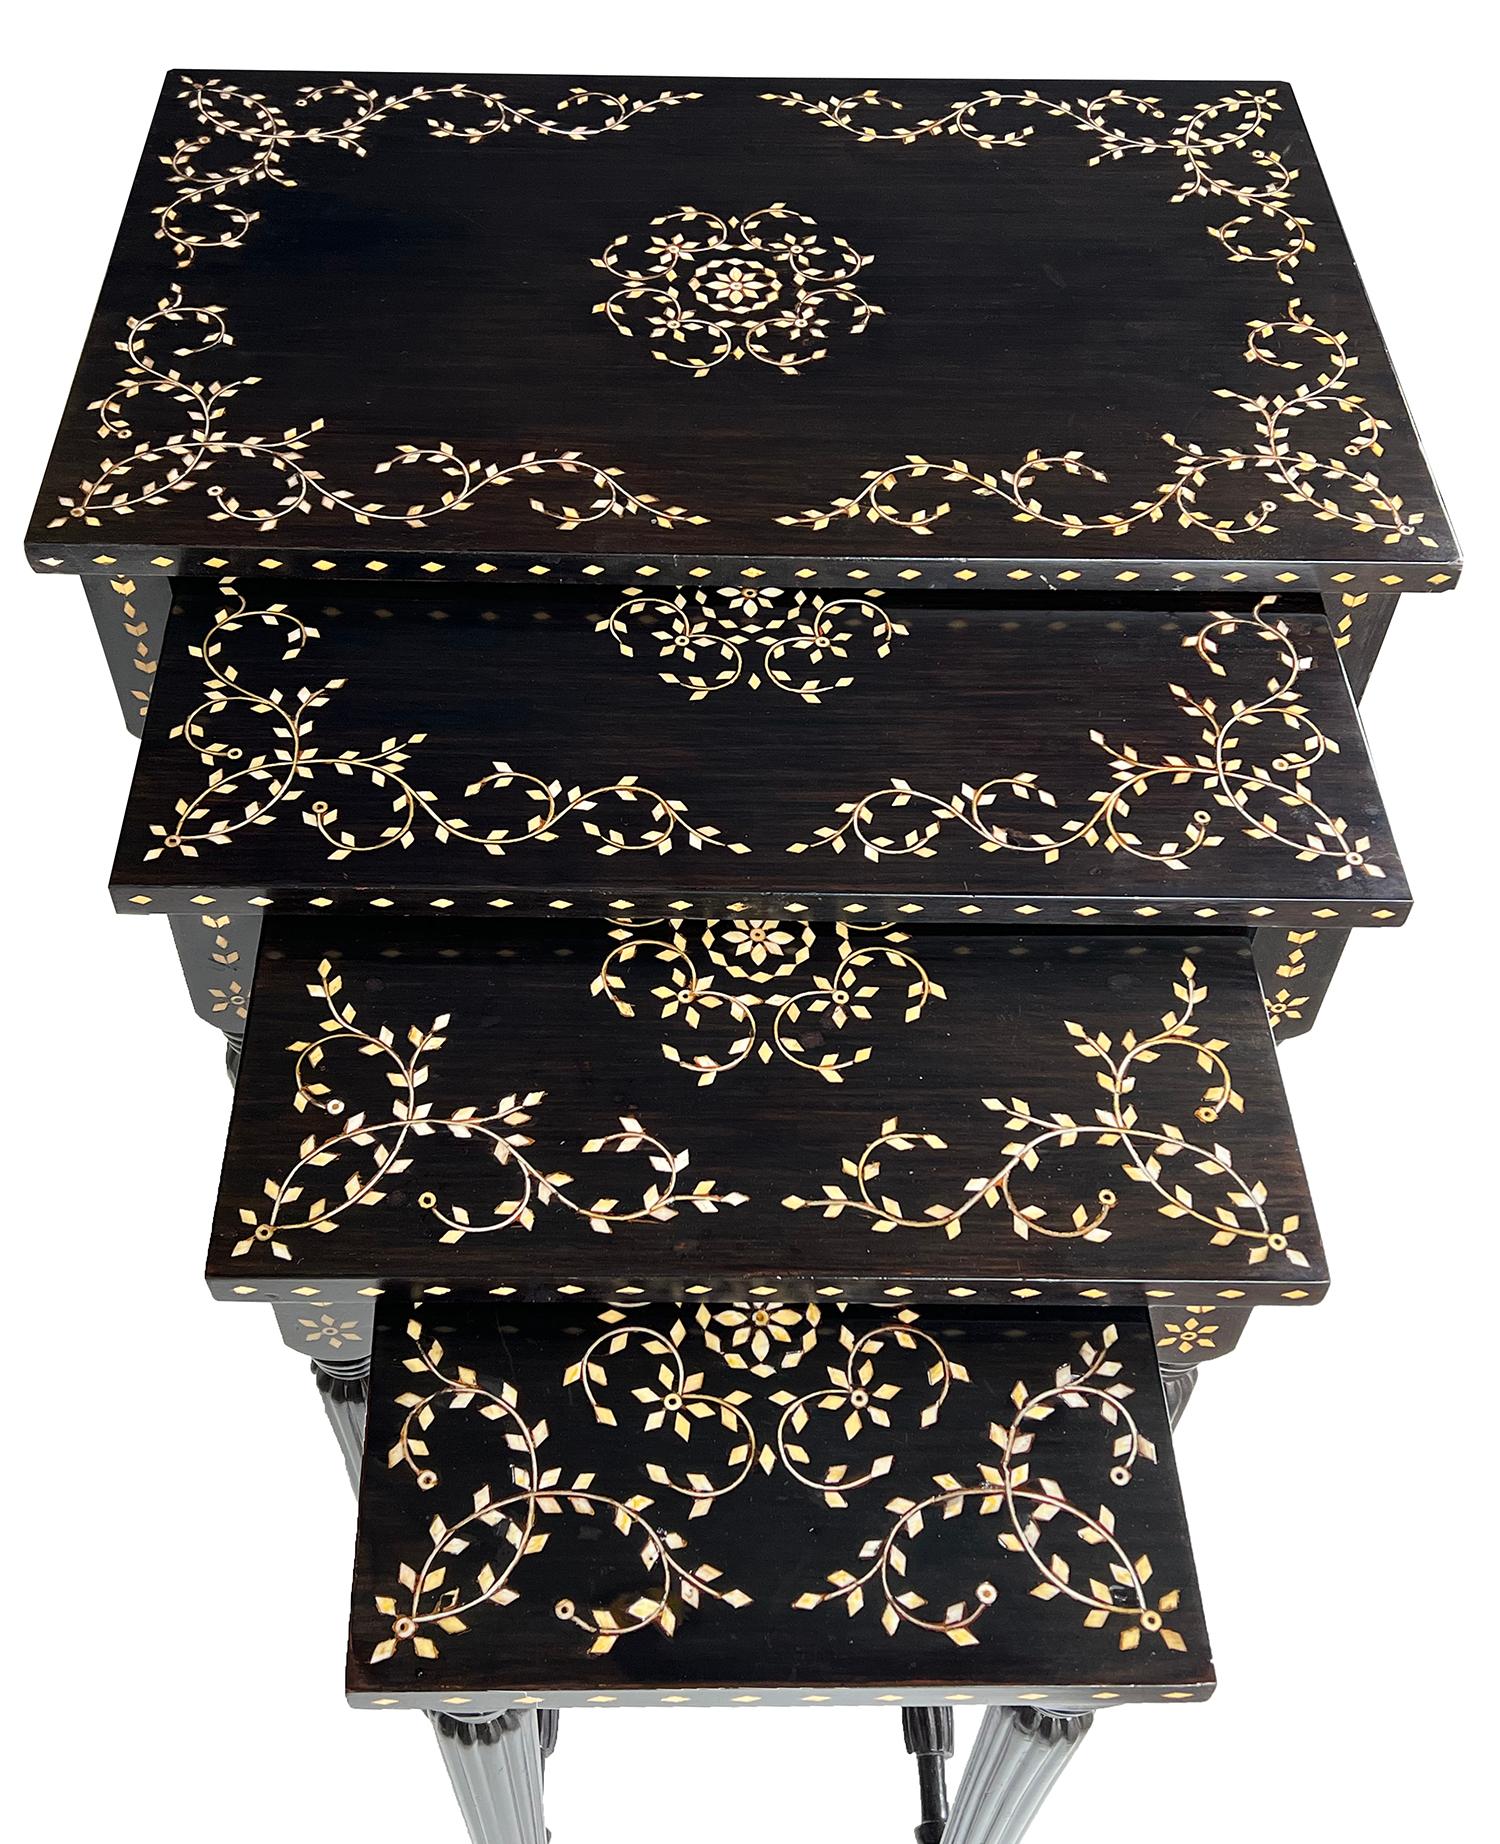 Anglo-Indian Rare Set of 4 Anglo Indian Inlaid and Ebonized Wood Nesting Tables